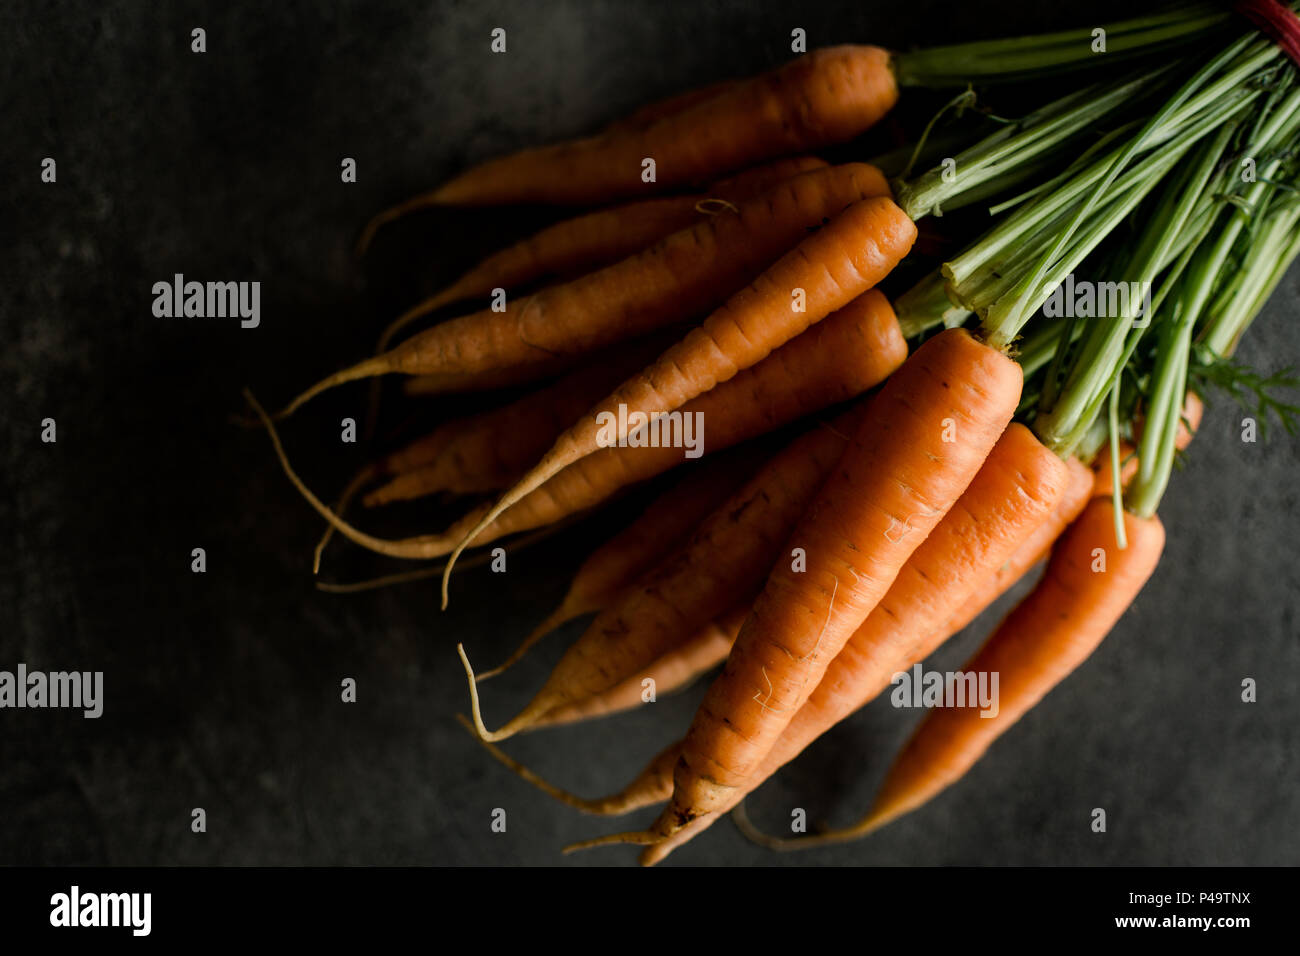 Organic Nantes Carrots on Rustic Dark Background. Fresh Superfood Healthy Eating Concept. Stock Photo